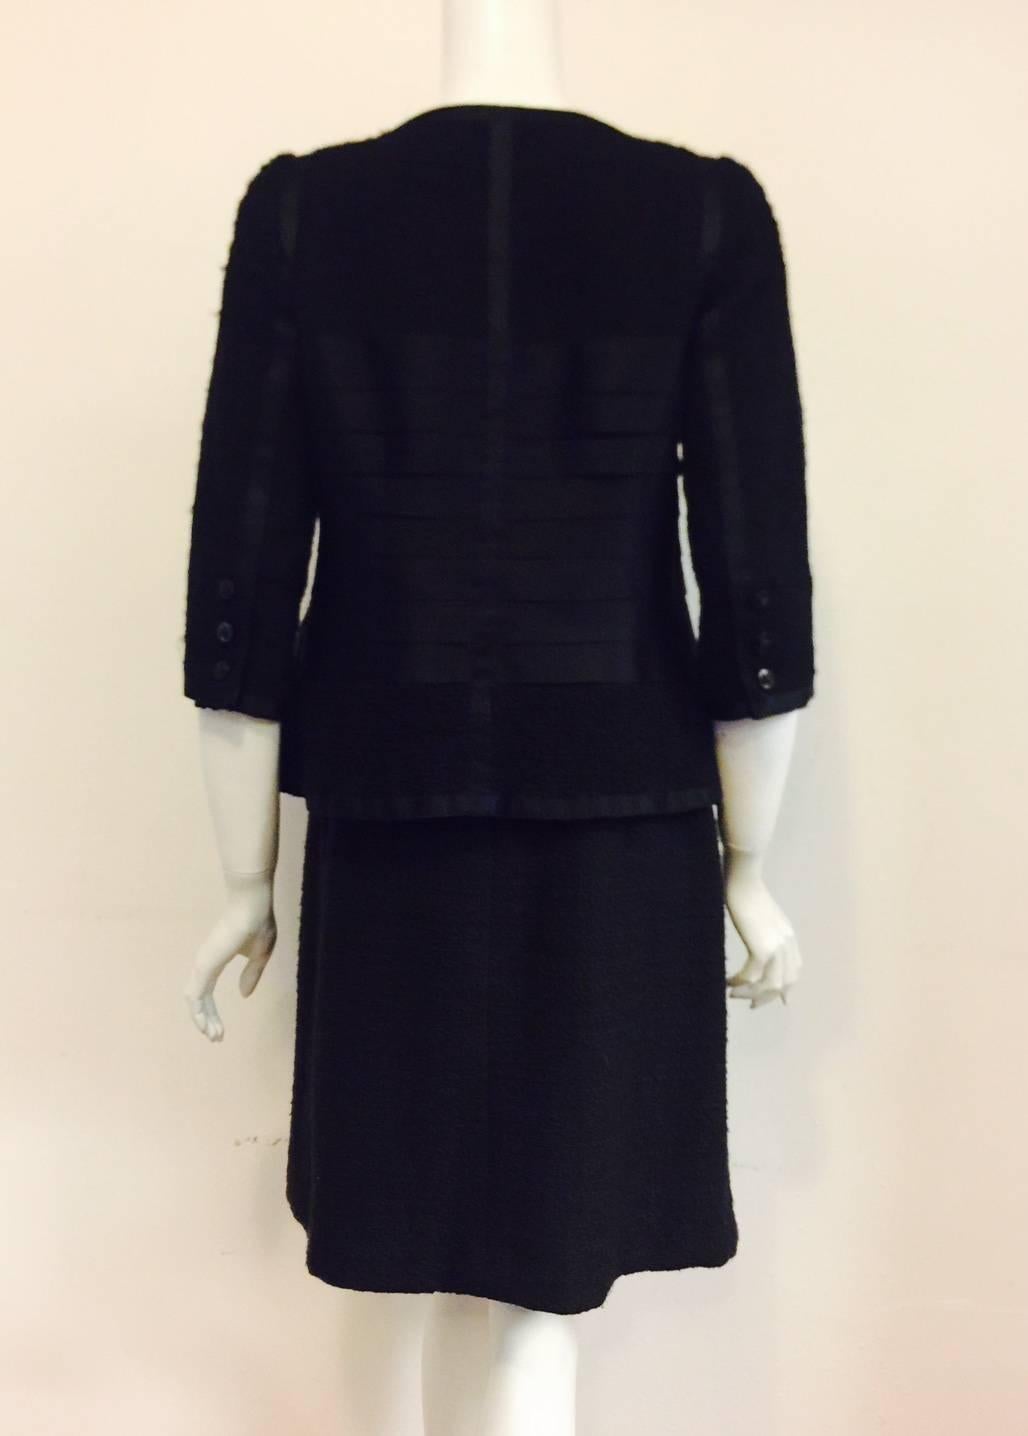 Chanel Black Wool and Cotton Tweed Evening Suit With Black Satin Trim 38 In Excellent Condition For Sale In Palm Beach, FL